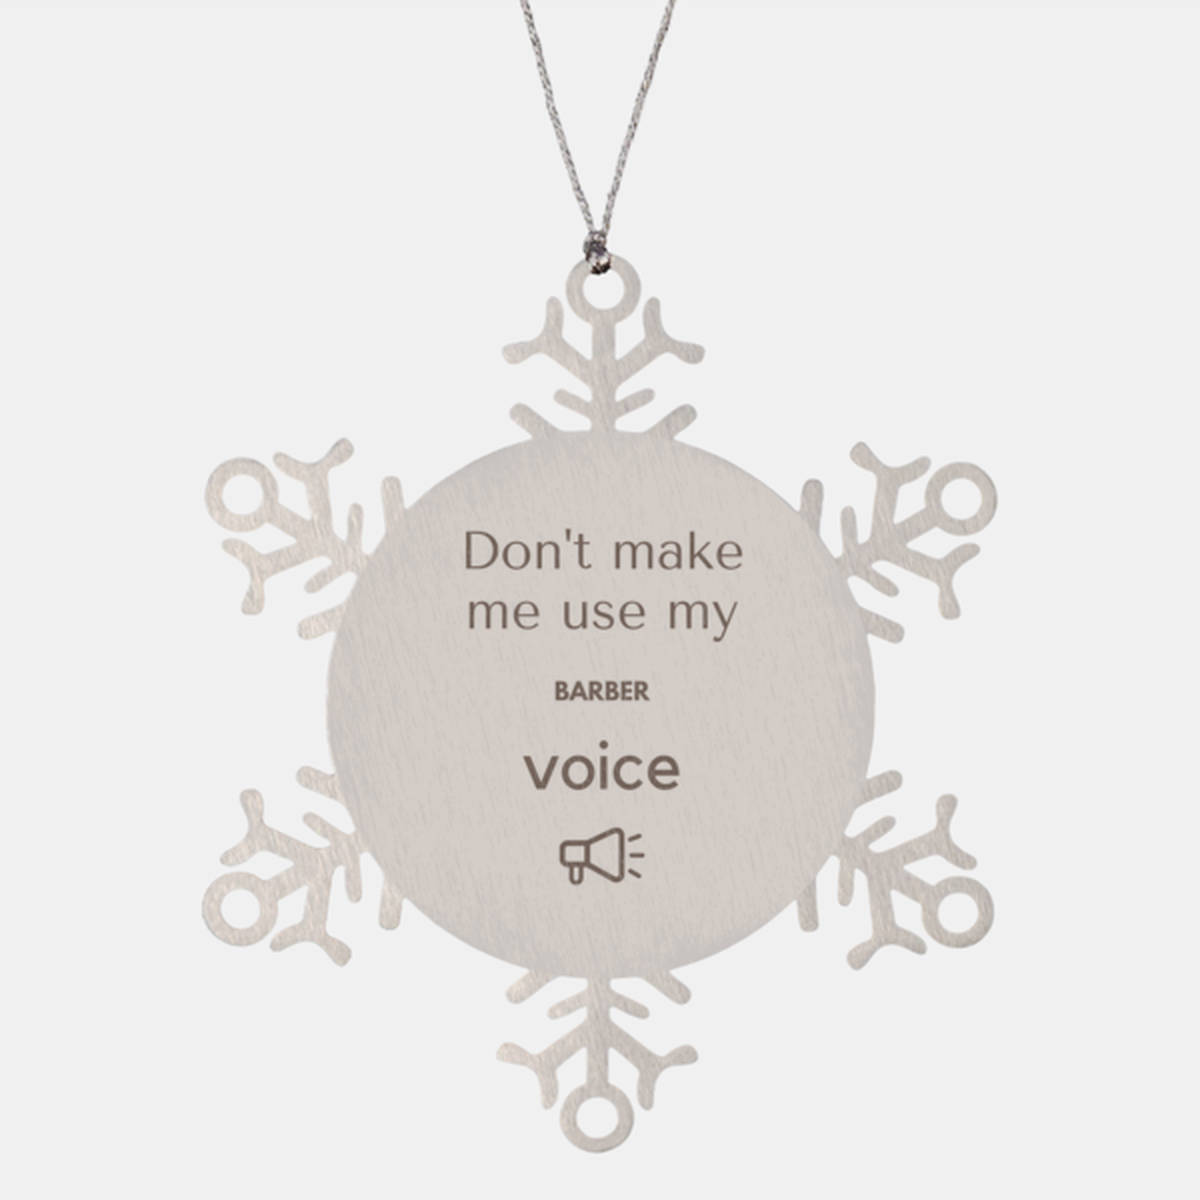 Don't make me use my Barber voice, Sarcasm Barber Ornament Gifts, Christmas Barber Snowflake Ornament Unique Gifts For Barber Coworkers, Men, Women, Colleague, Friends